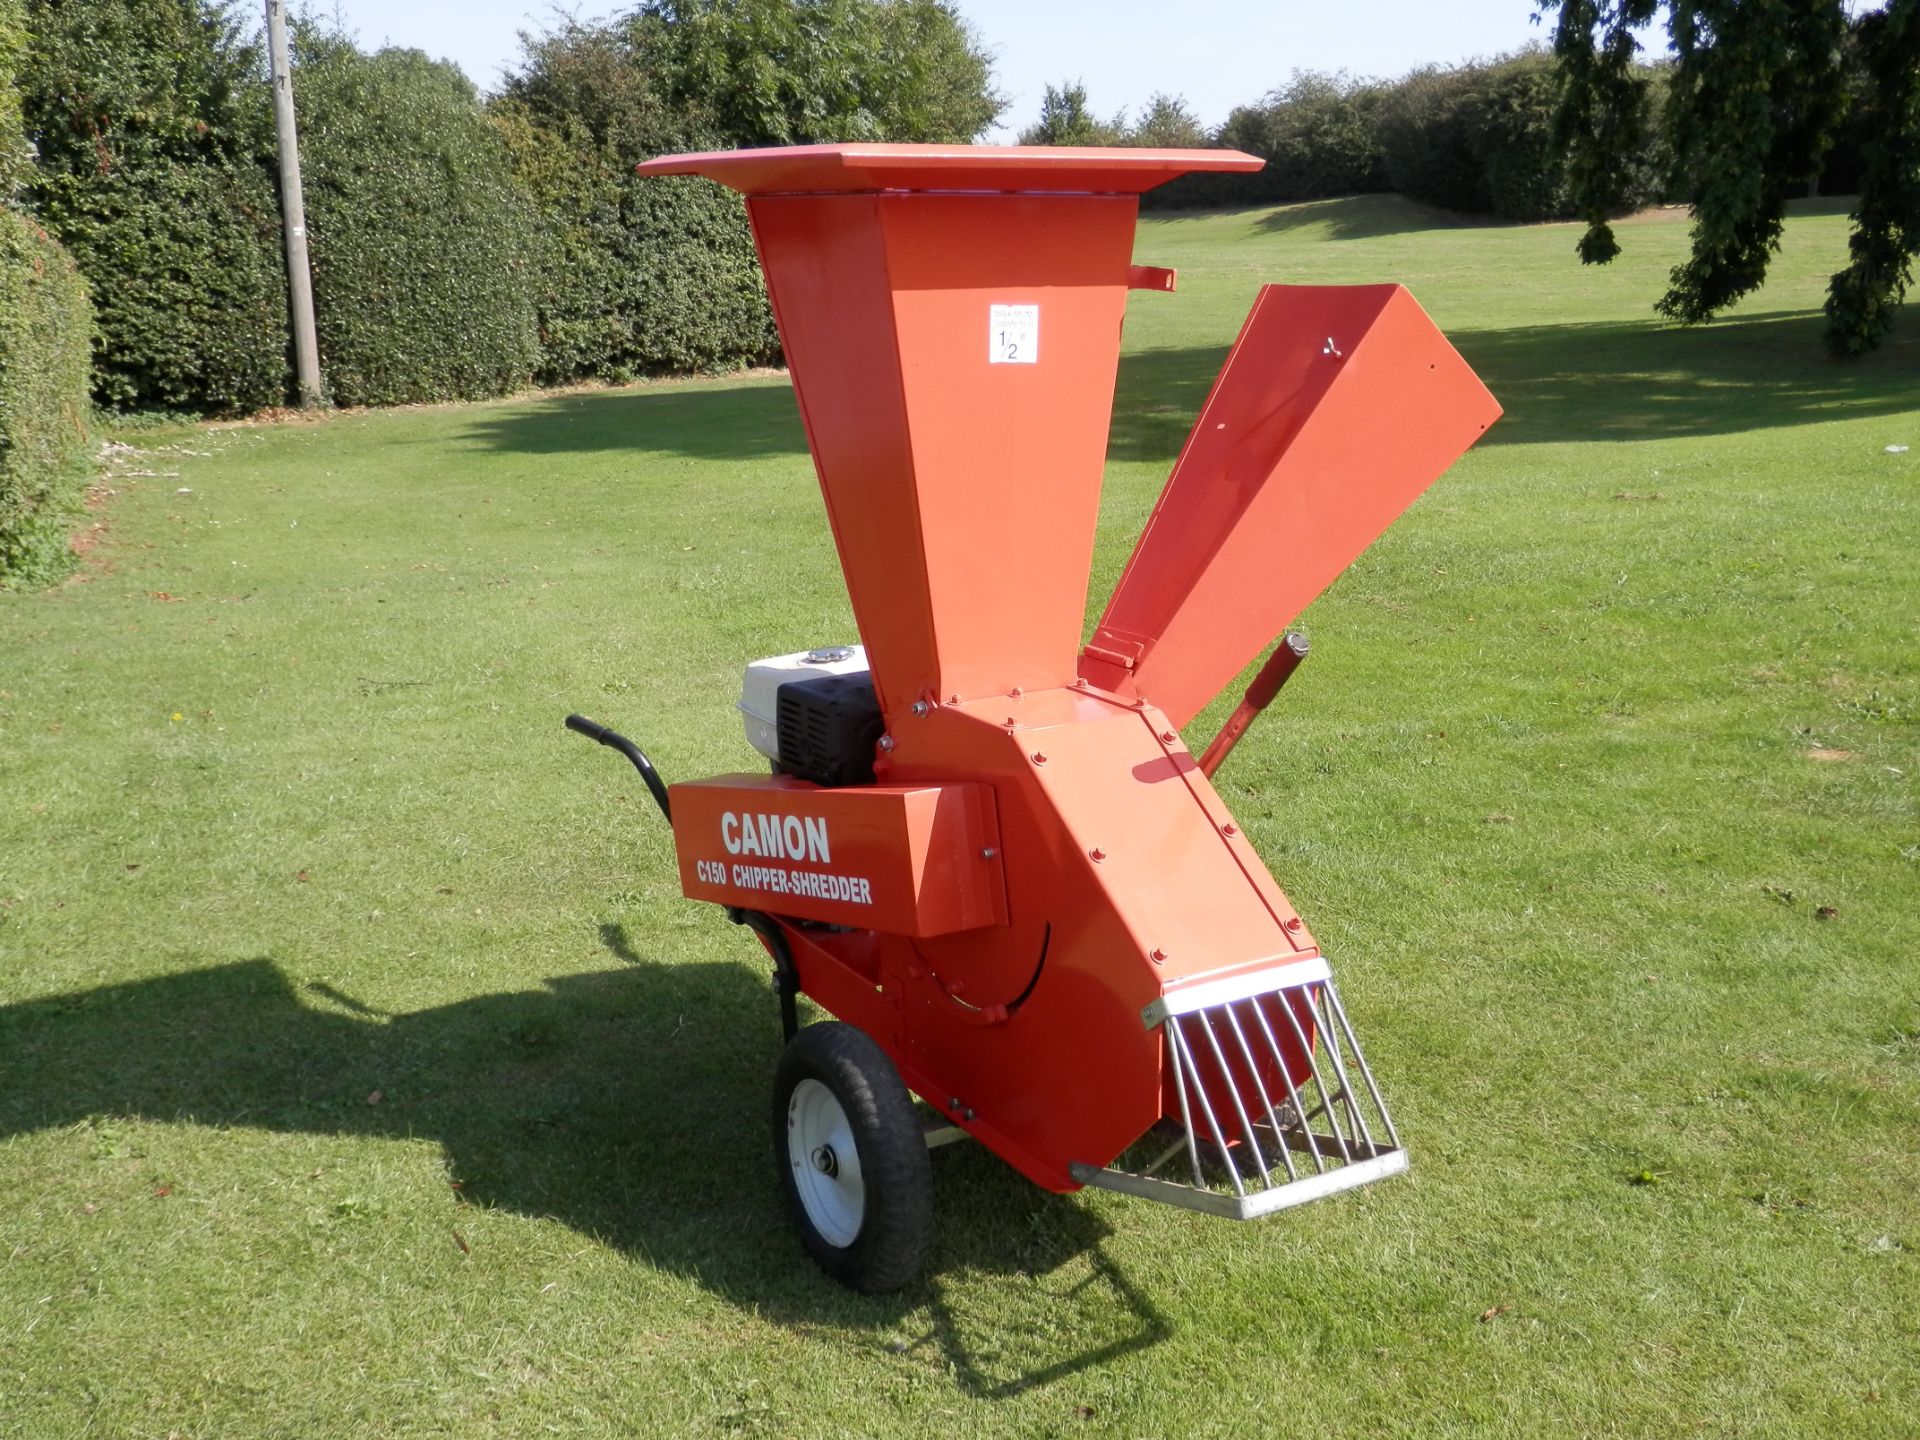 SUPERB CAMON C150 3.5" PETROL POWERED WOOD CHIPPER 13HP HONDA ENGINE, TESTED & WORKING WELL - Image 2 of 6